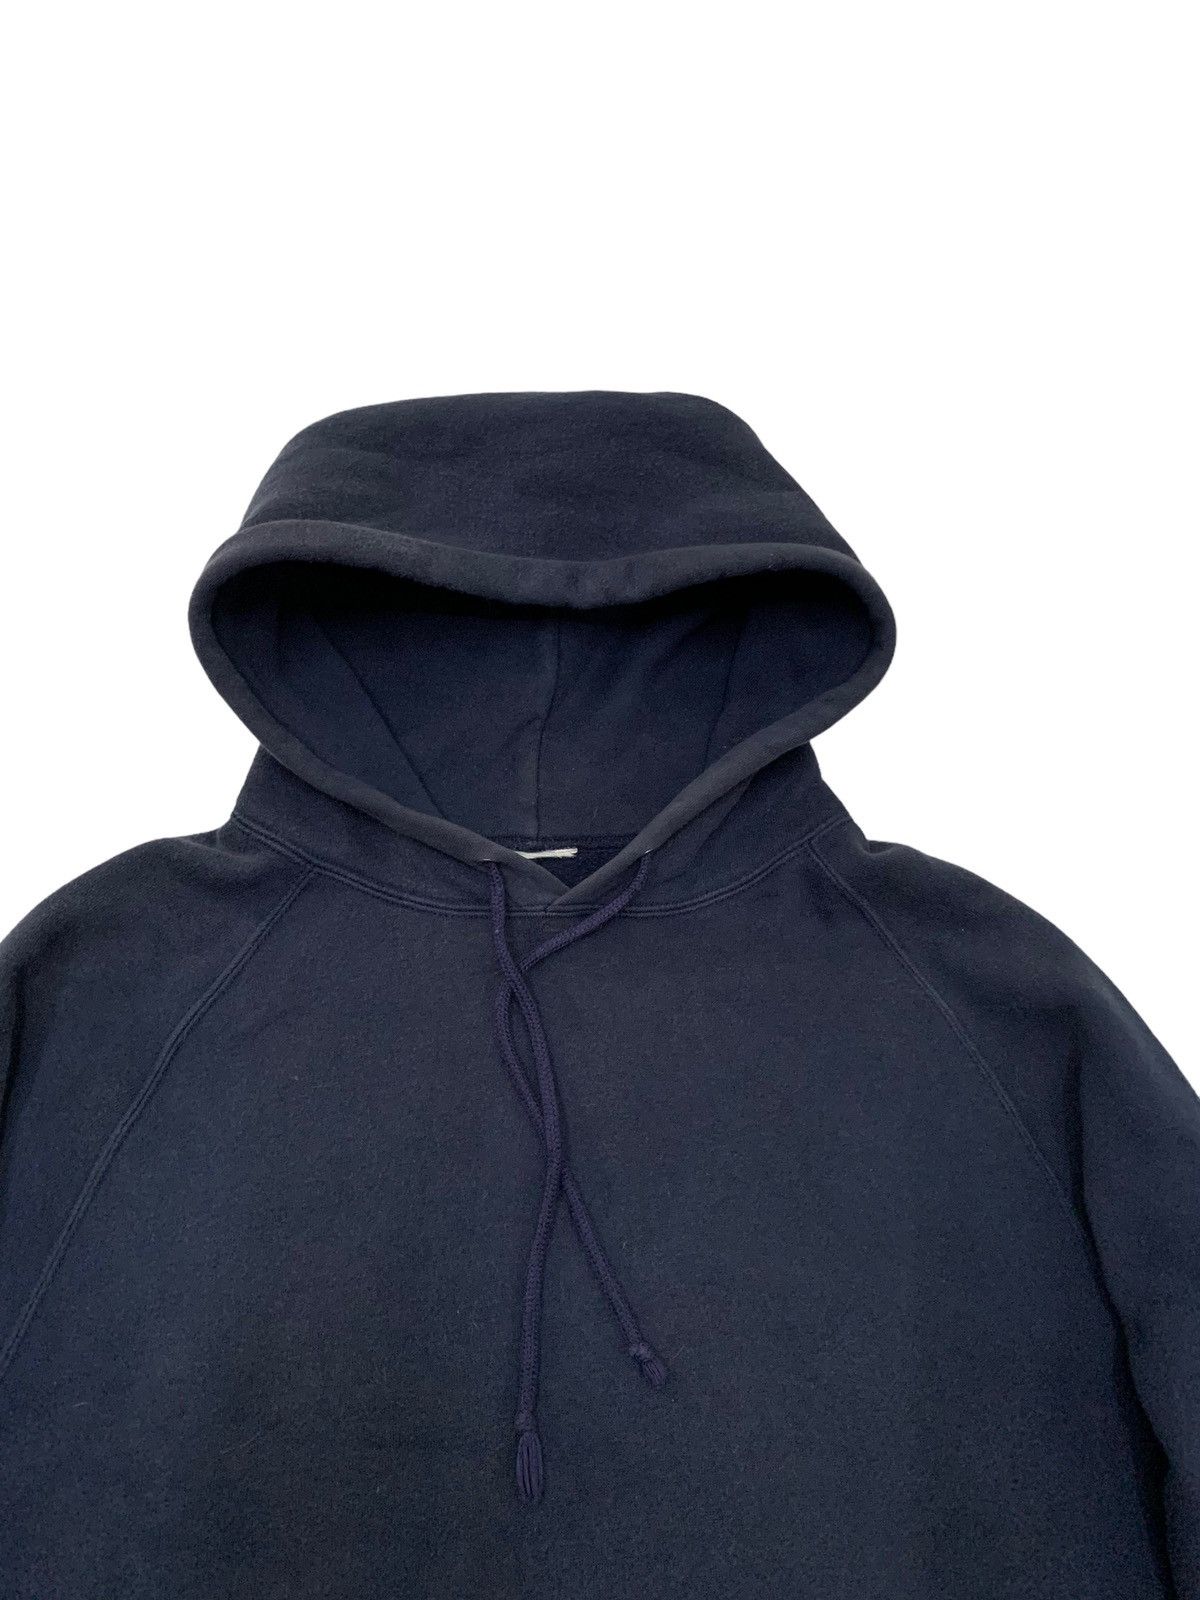 🔥WTAPS NAVY PULLOVER HOODIE - 8